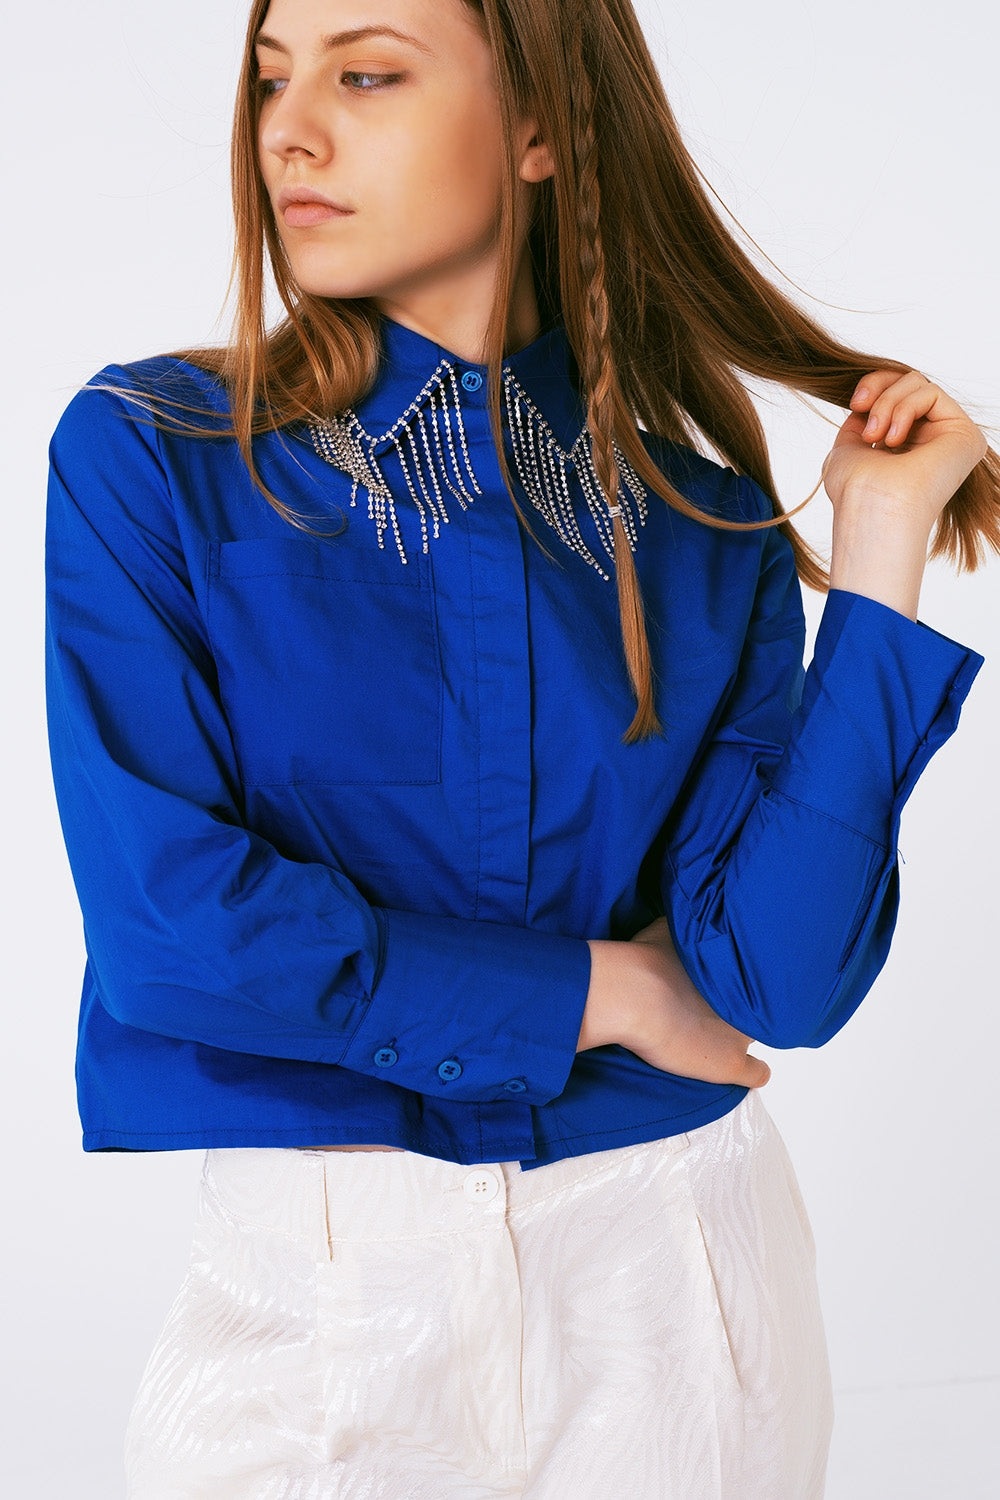 Shirt With Fringe strass Collar in blue - Szua Store